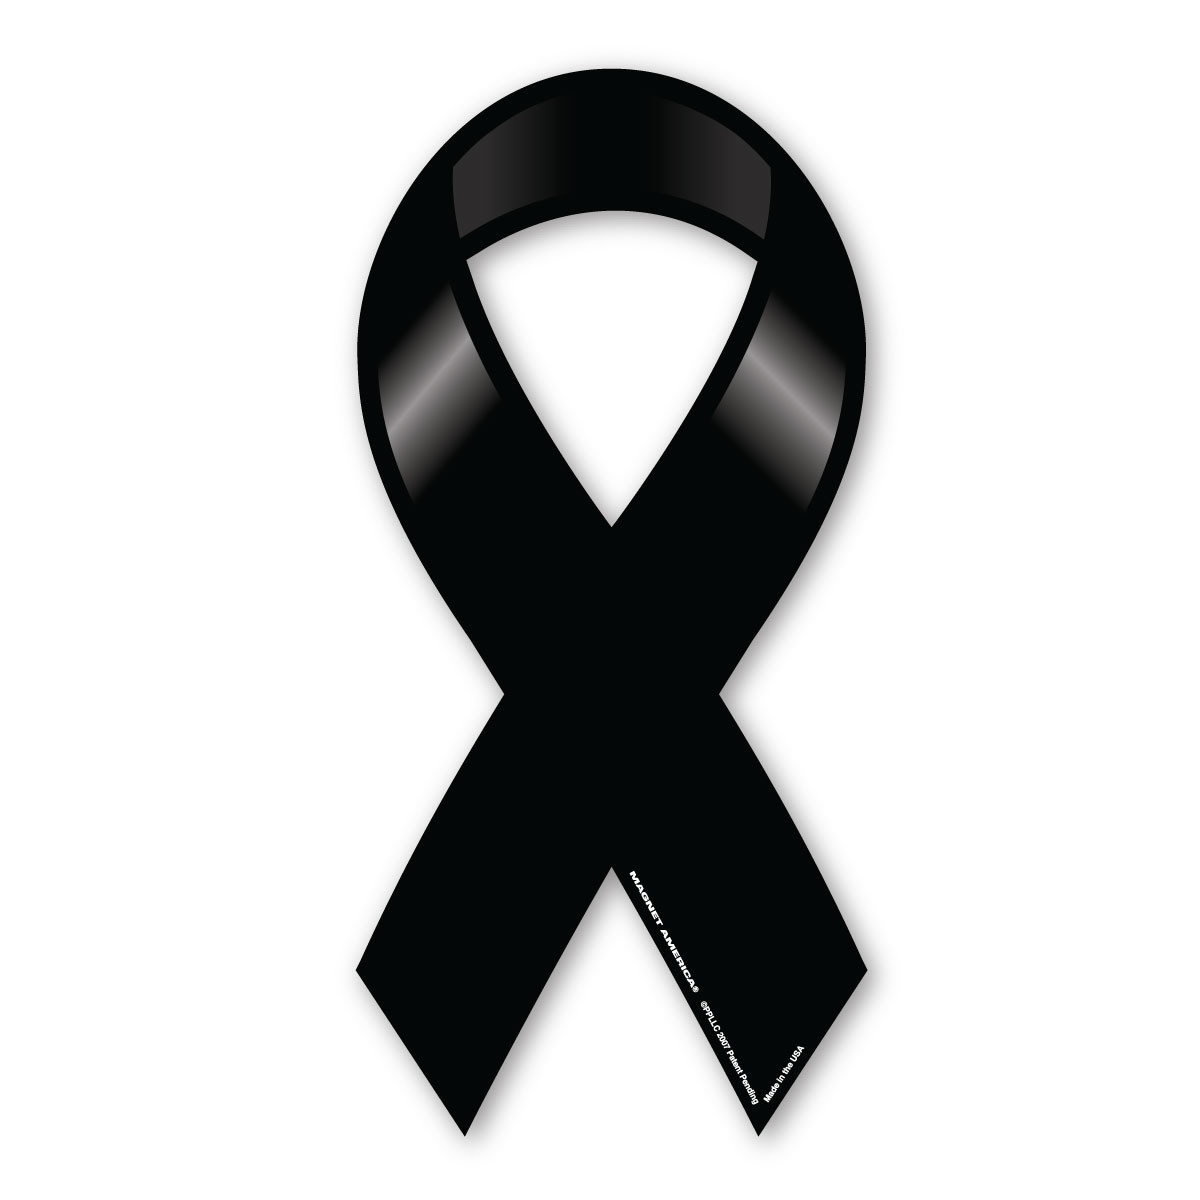 Black Ribbon Vector Art, Icons, and Graphics for Free Download